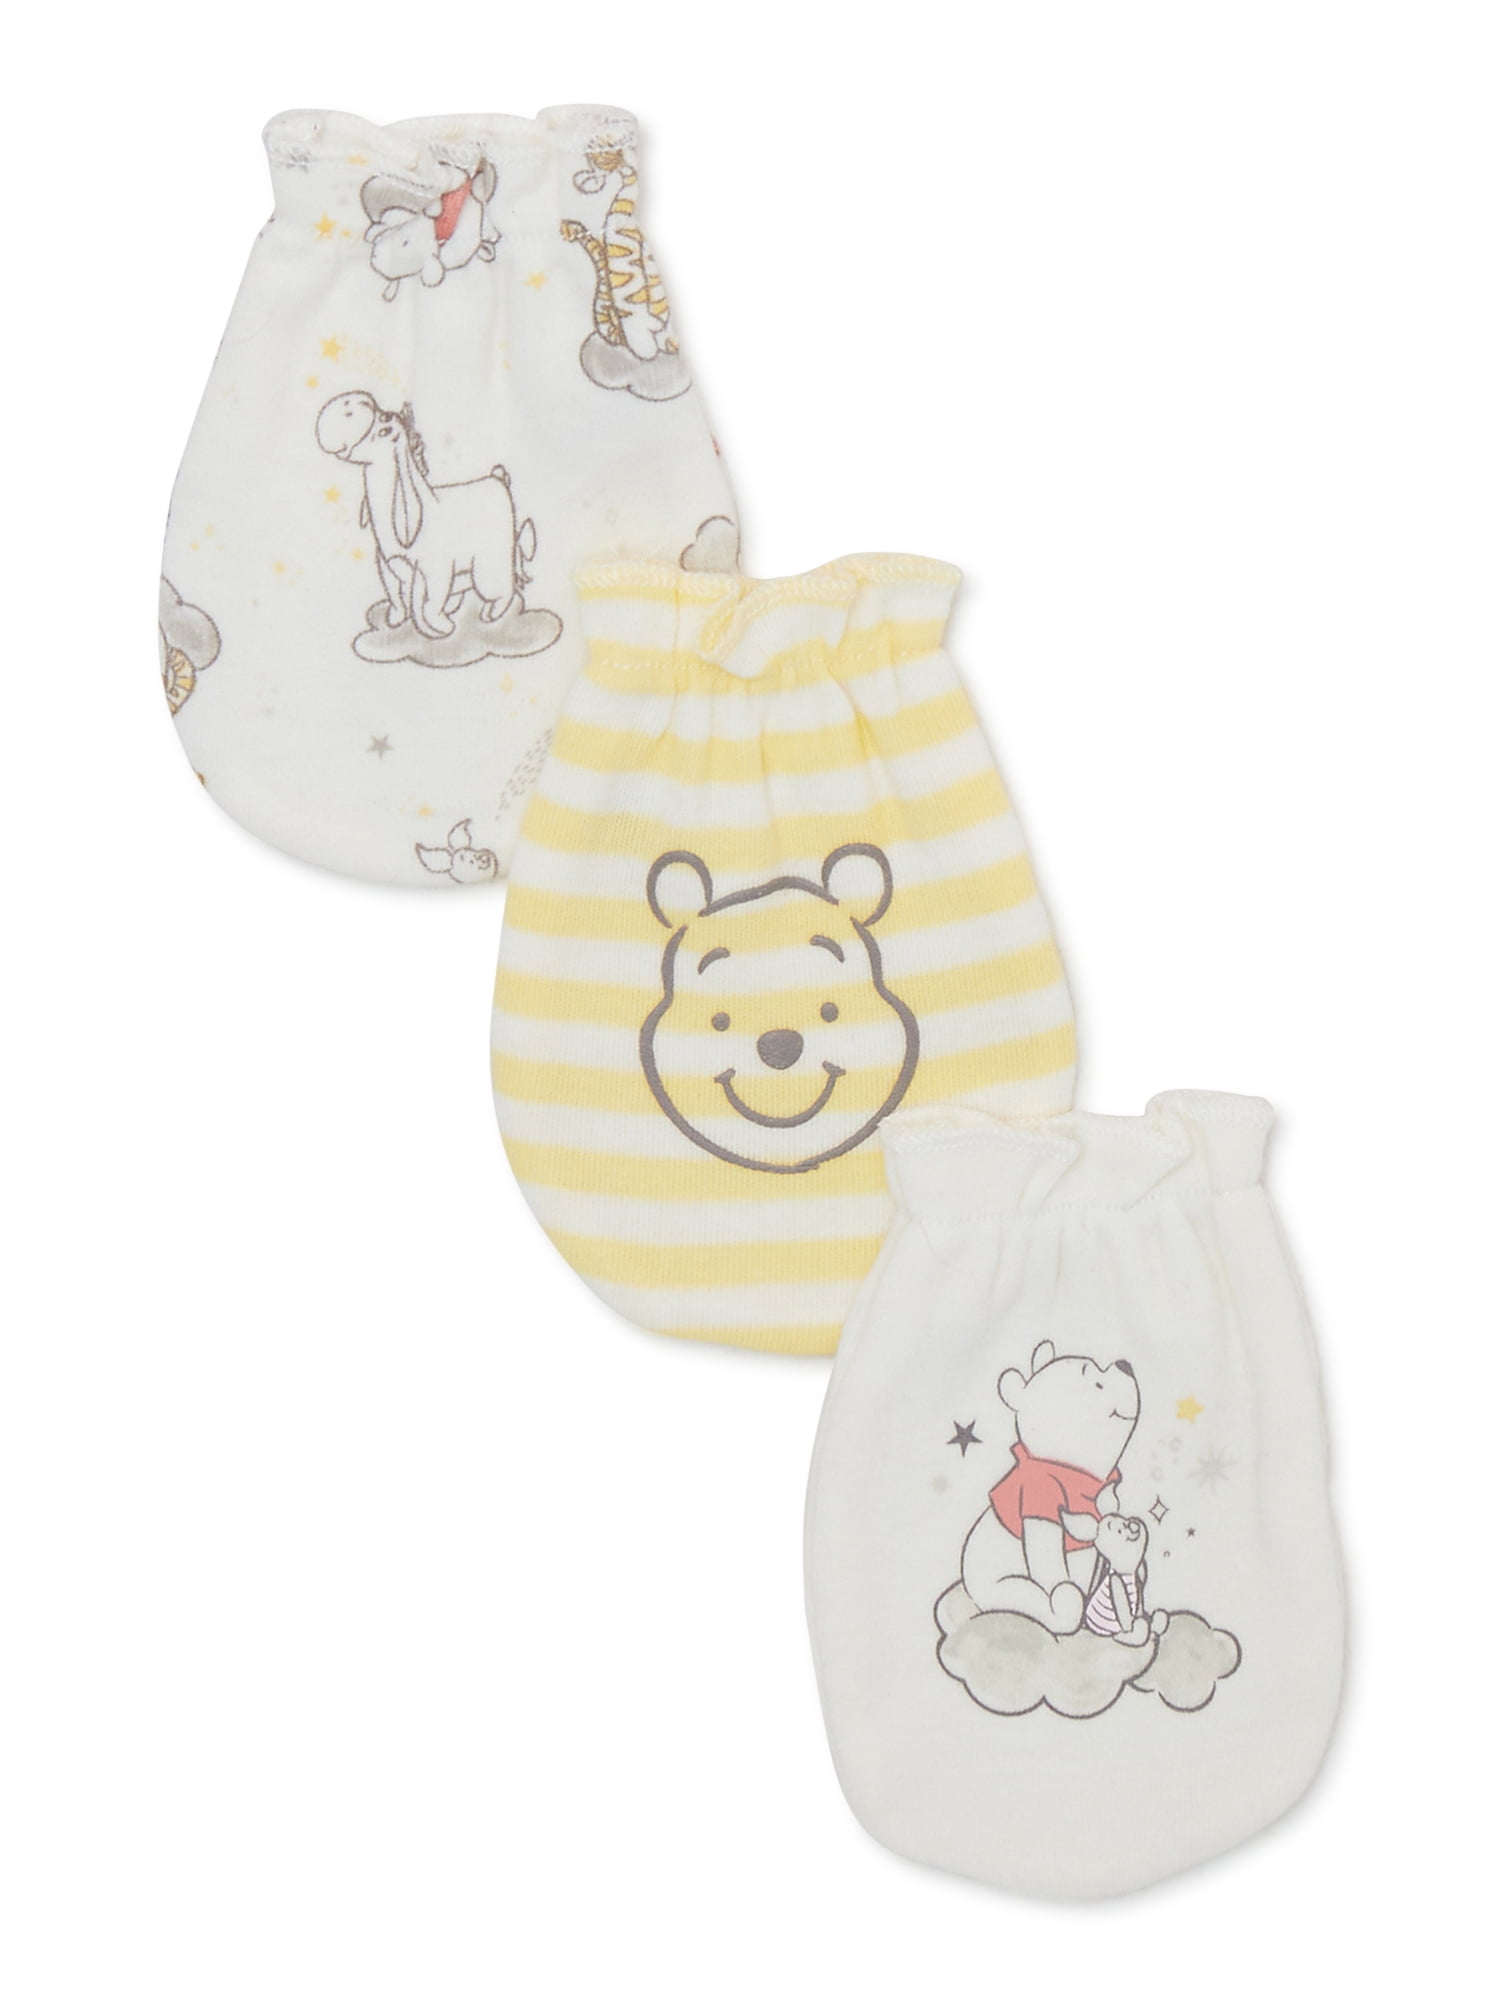 Disney Baby Wishes + Dreams Winnie the Pooh Baby Boys and Girls Unisex Mittens Caps, 3-Pack